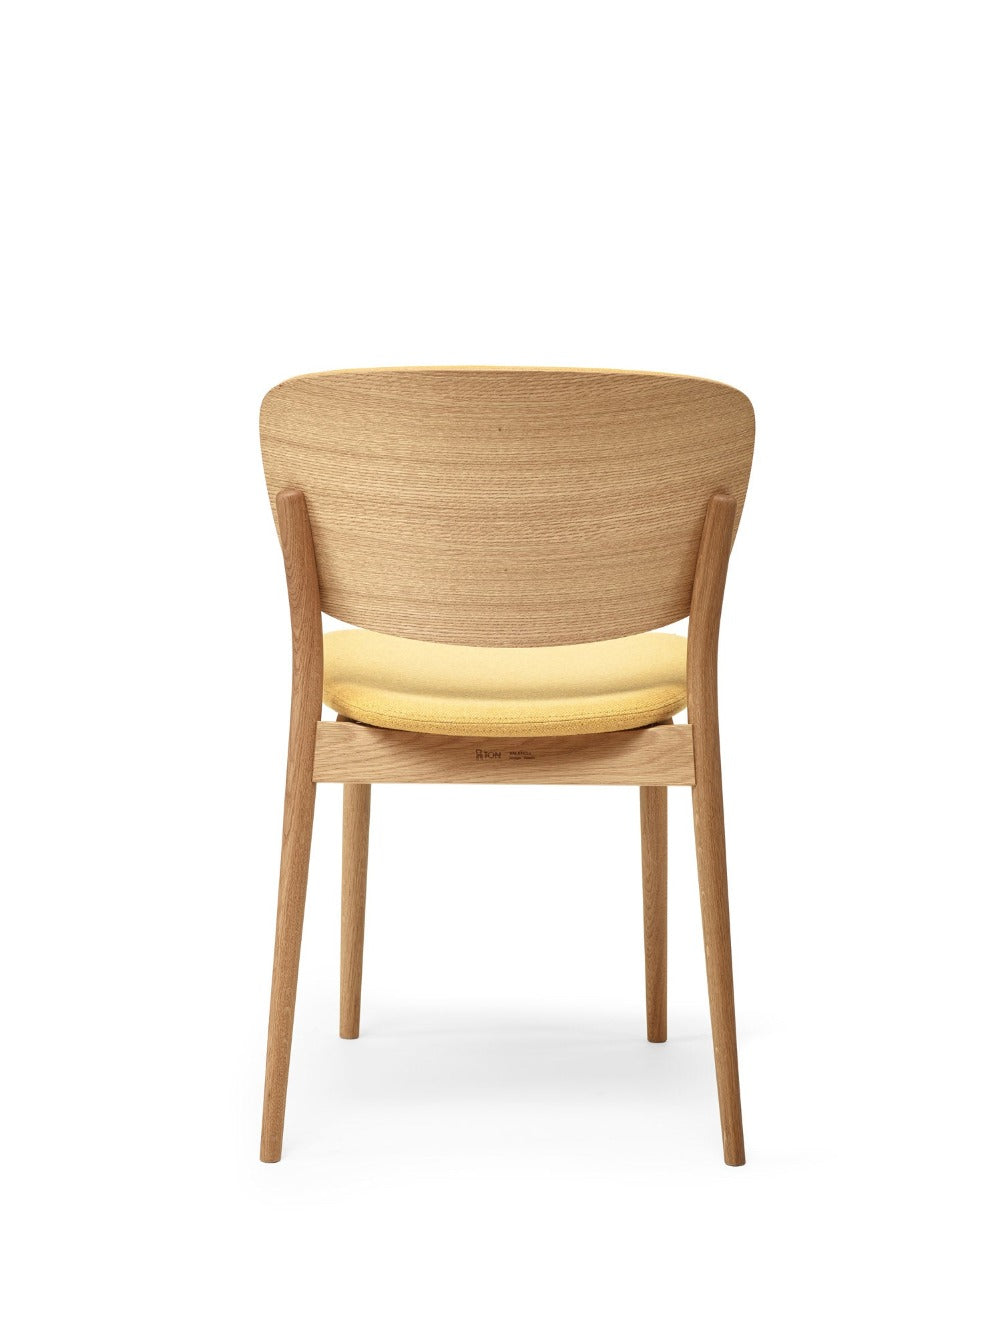 TON VALENCIA Chair - [Upholstered]